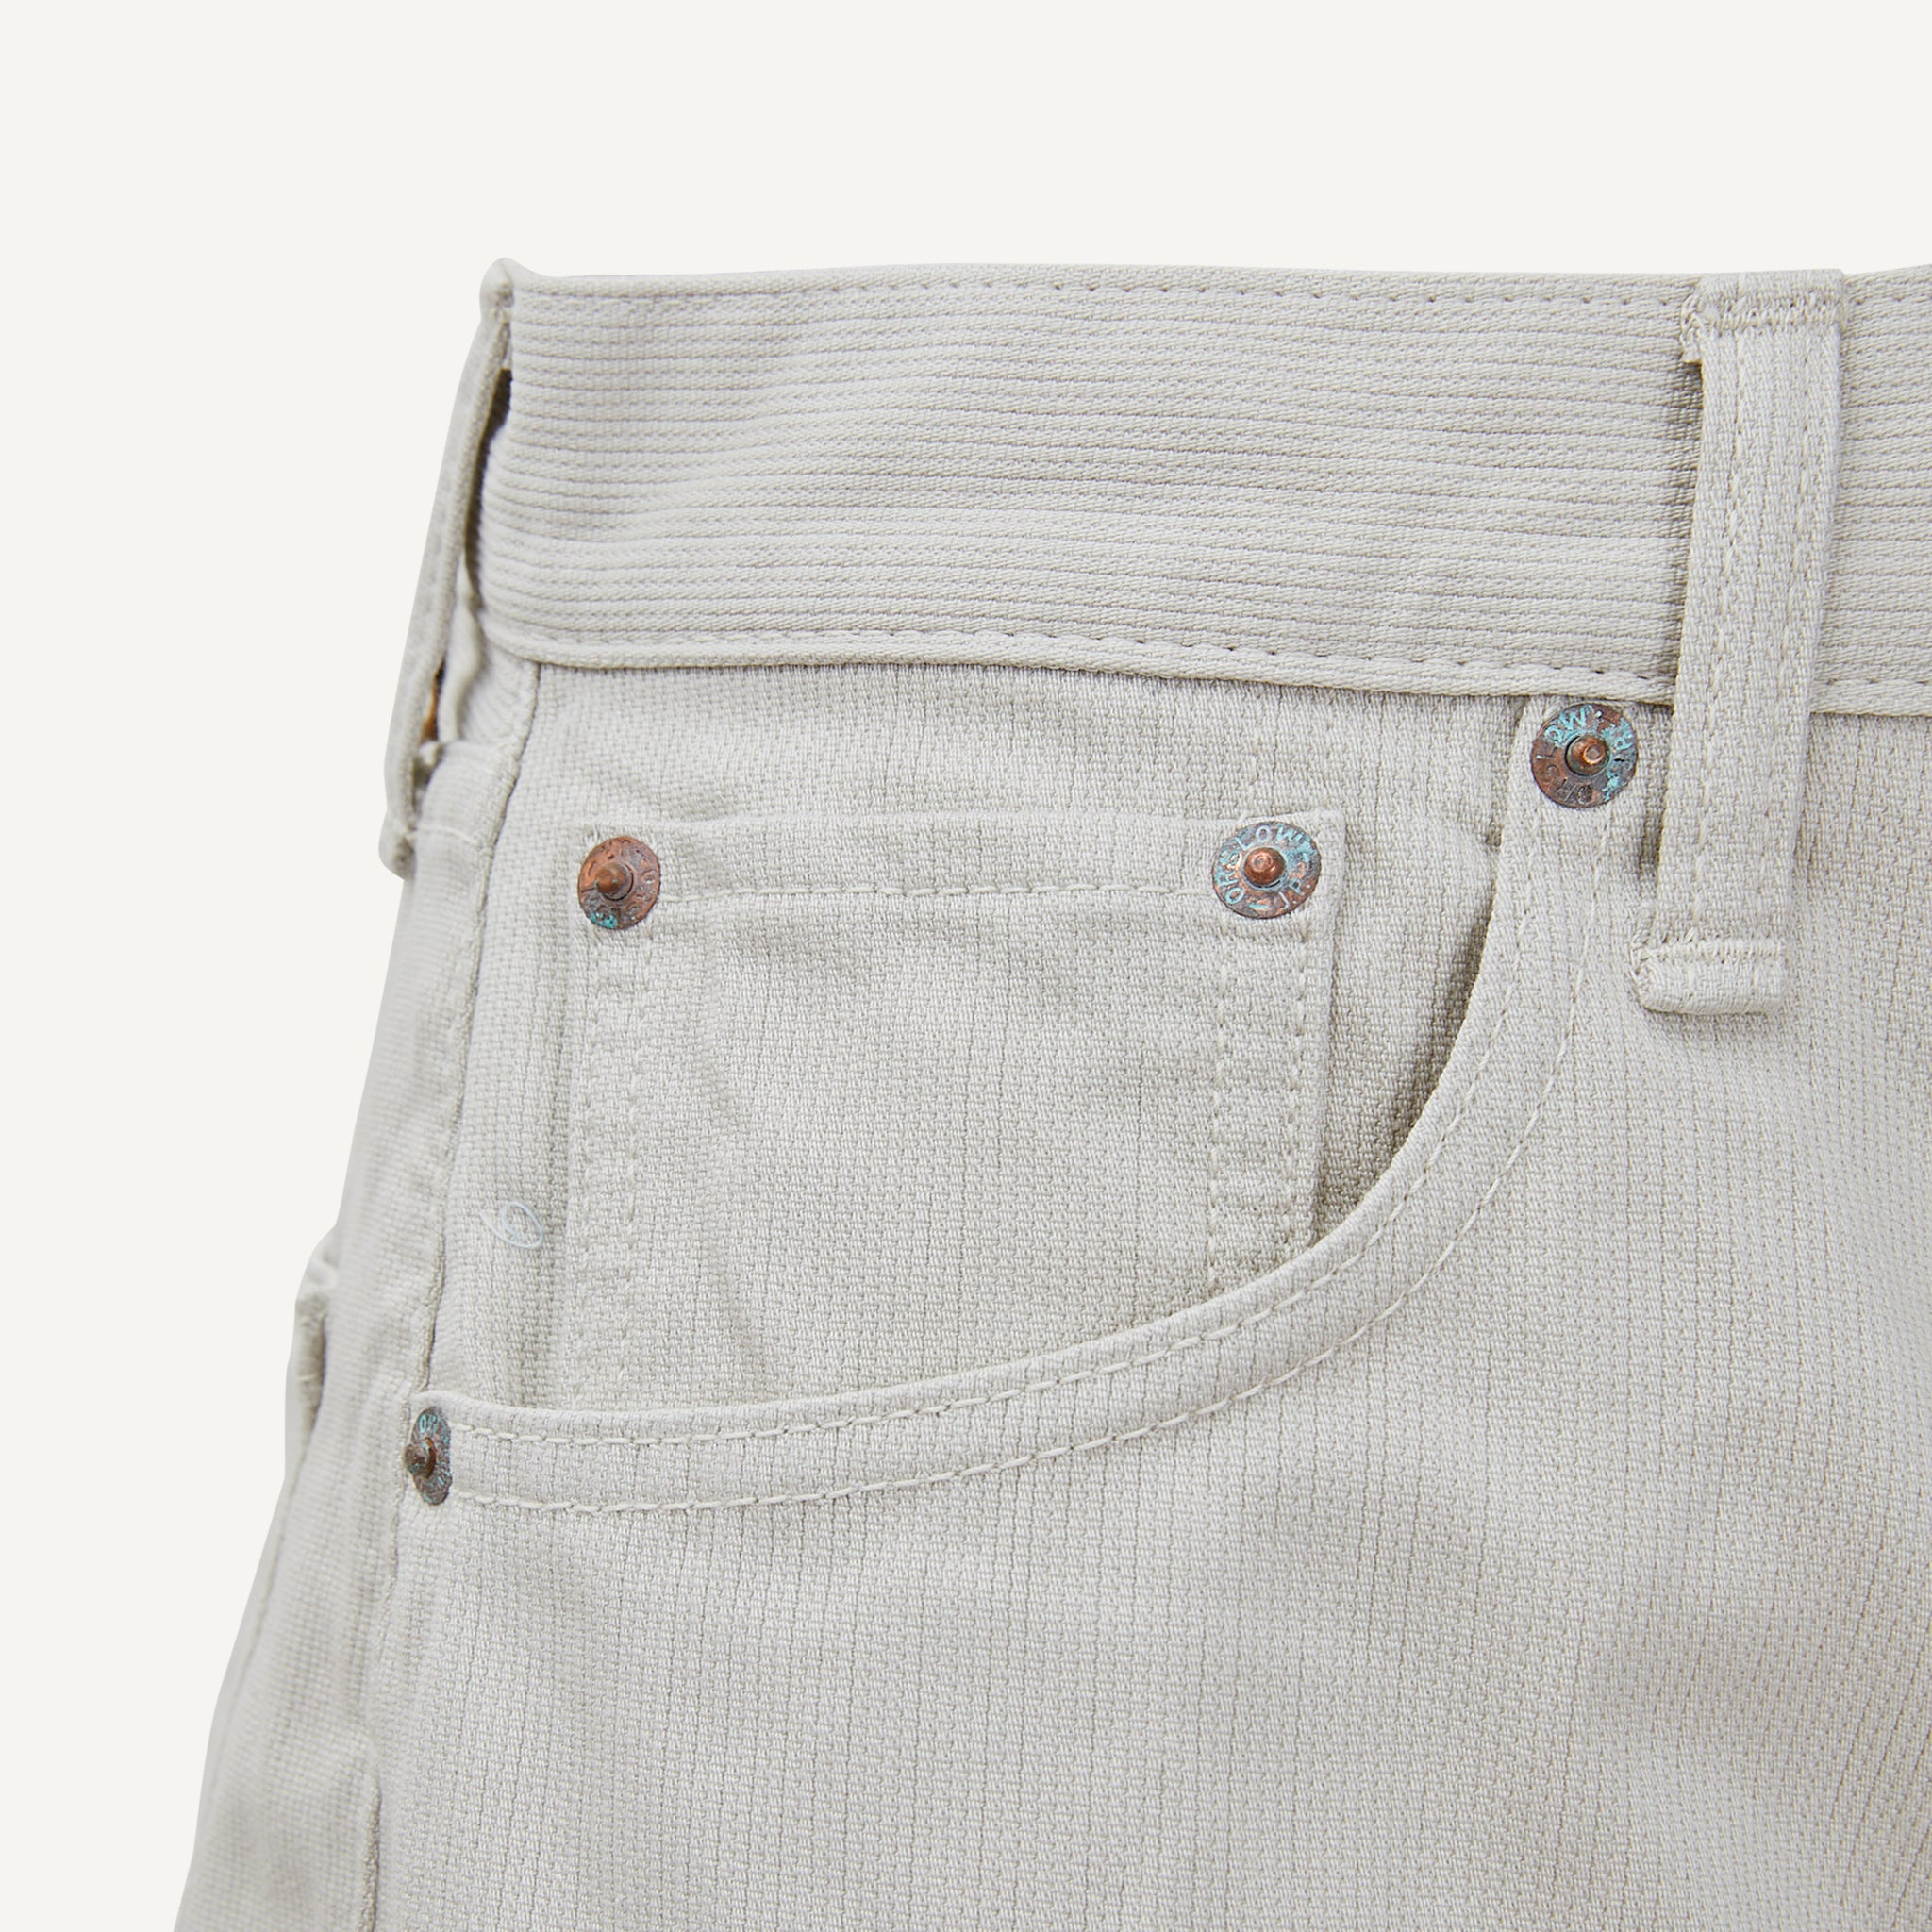 ORSLOW 107 BEDFORD PANT